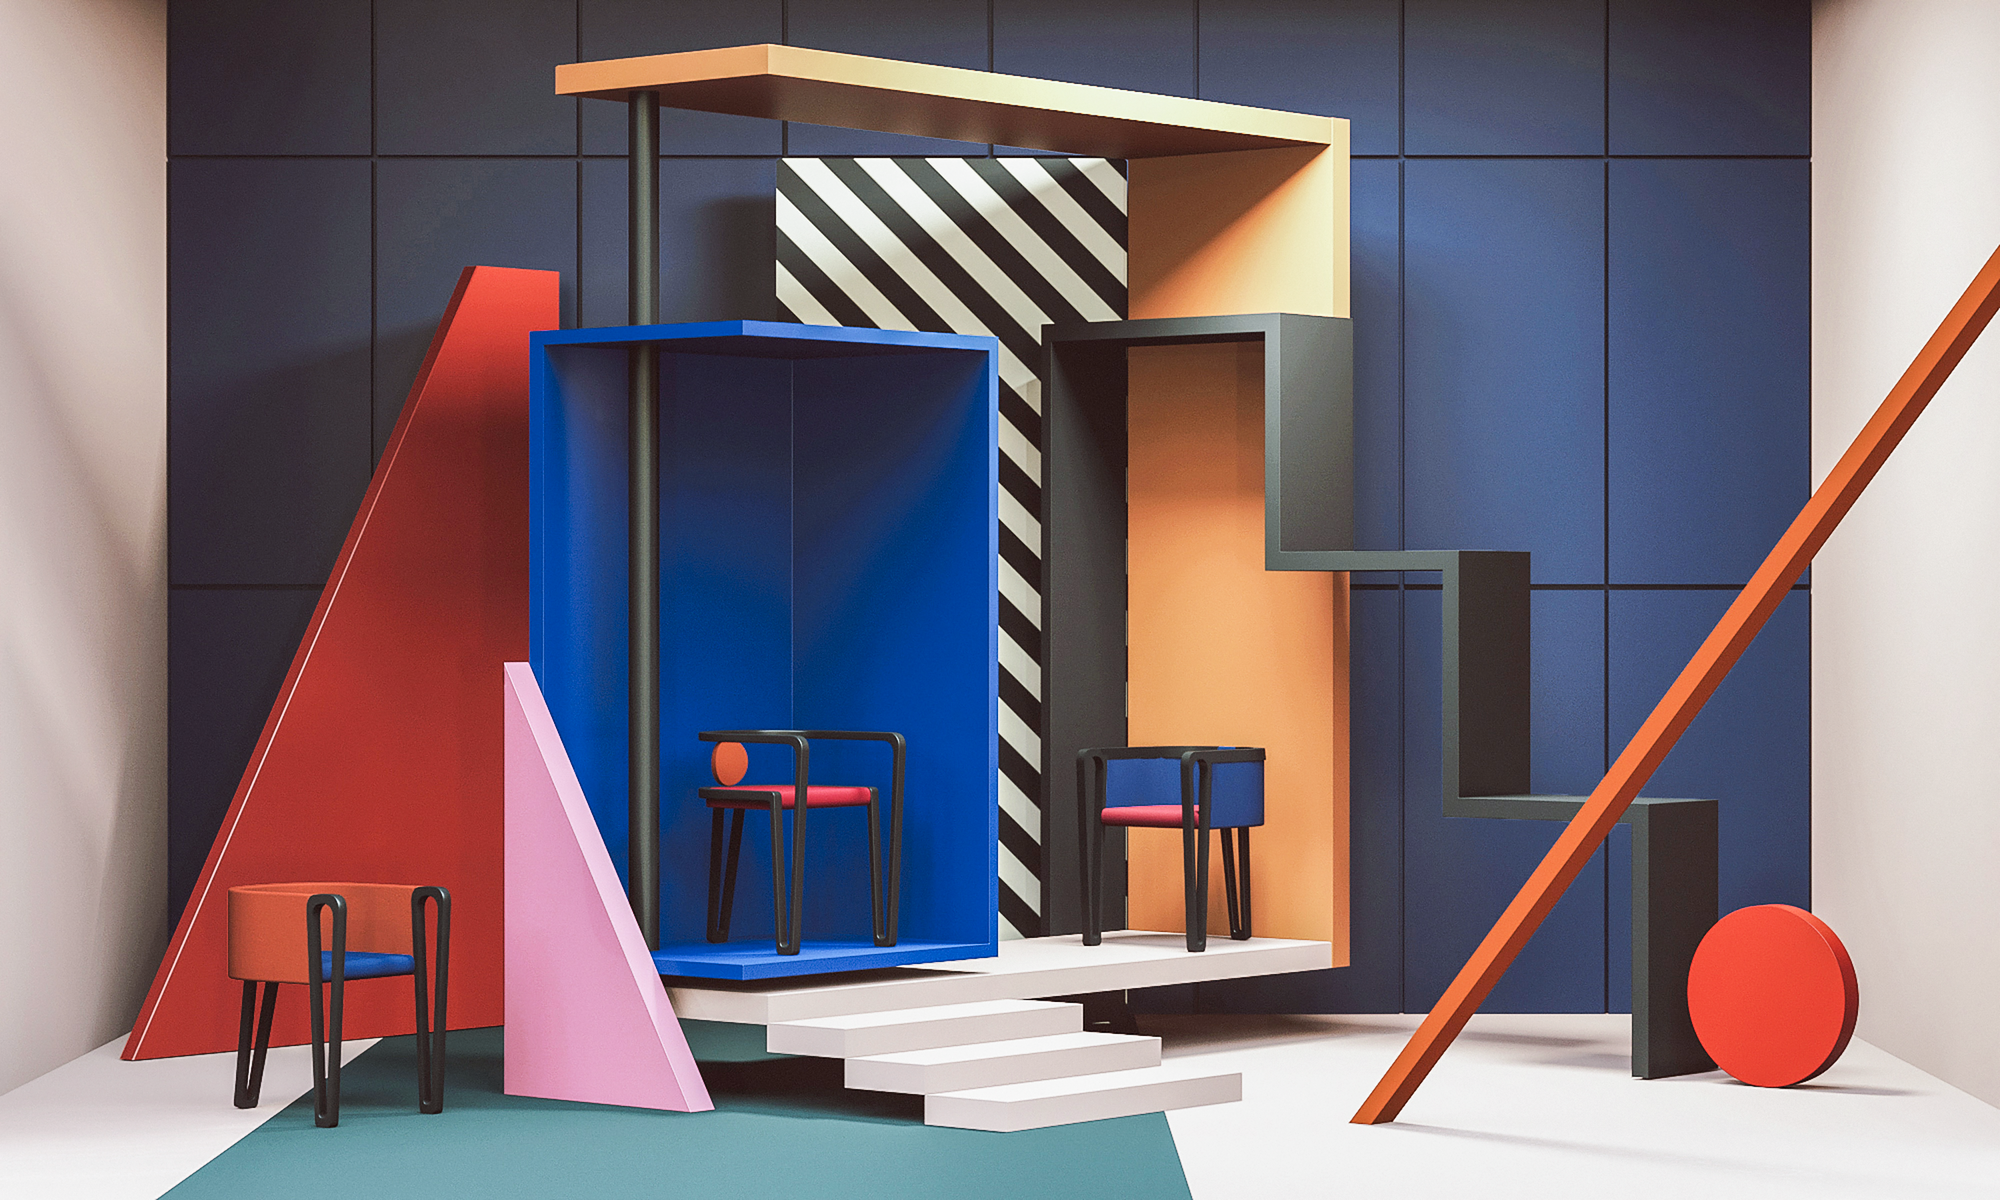 Creating with colors—the meeting of Bauhaus, suprematism and contemporary design